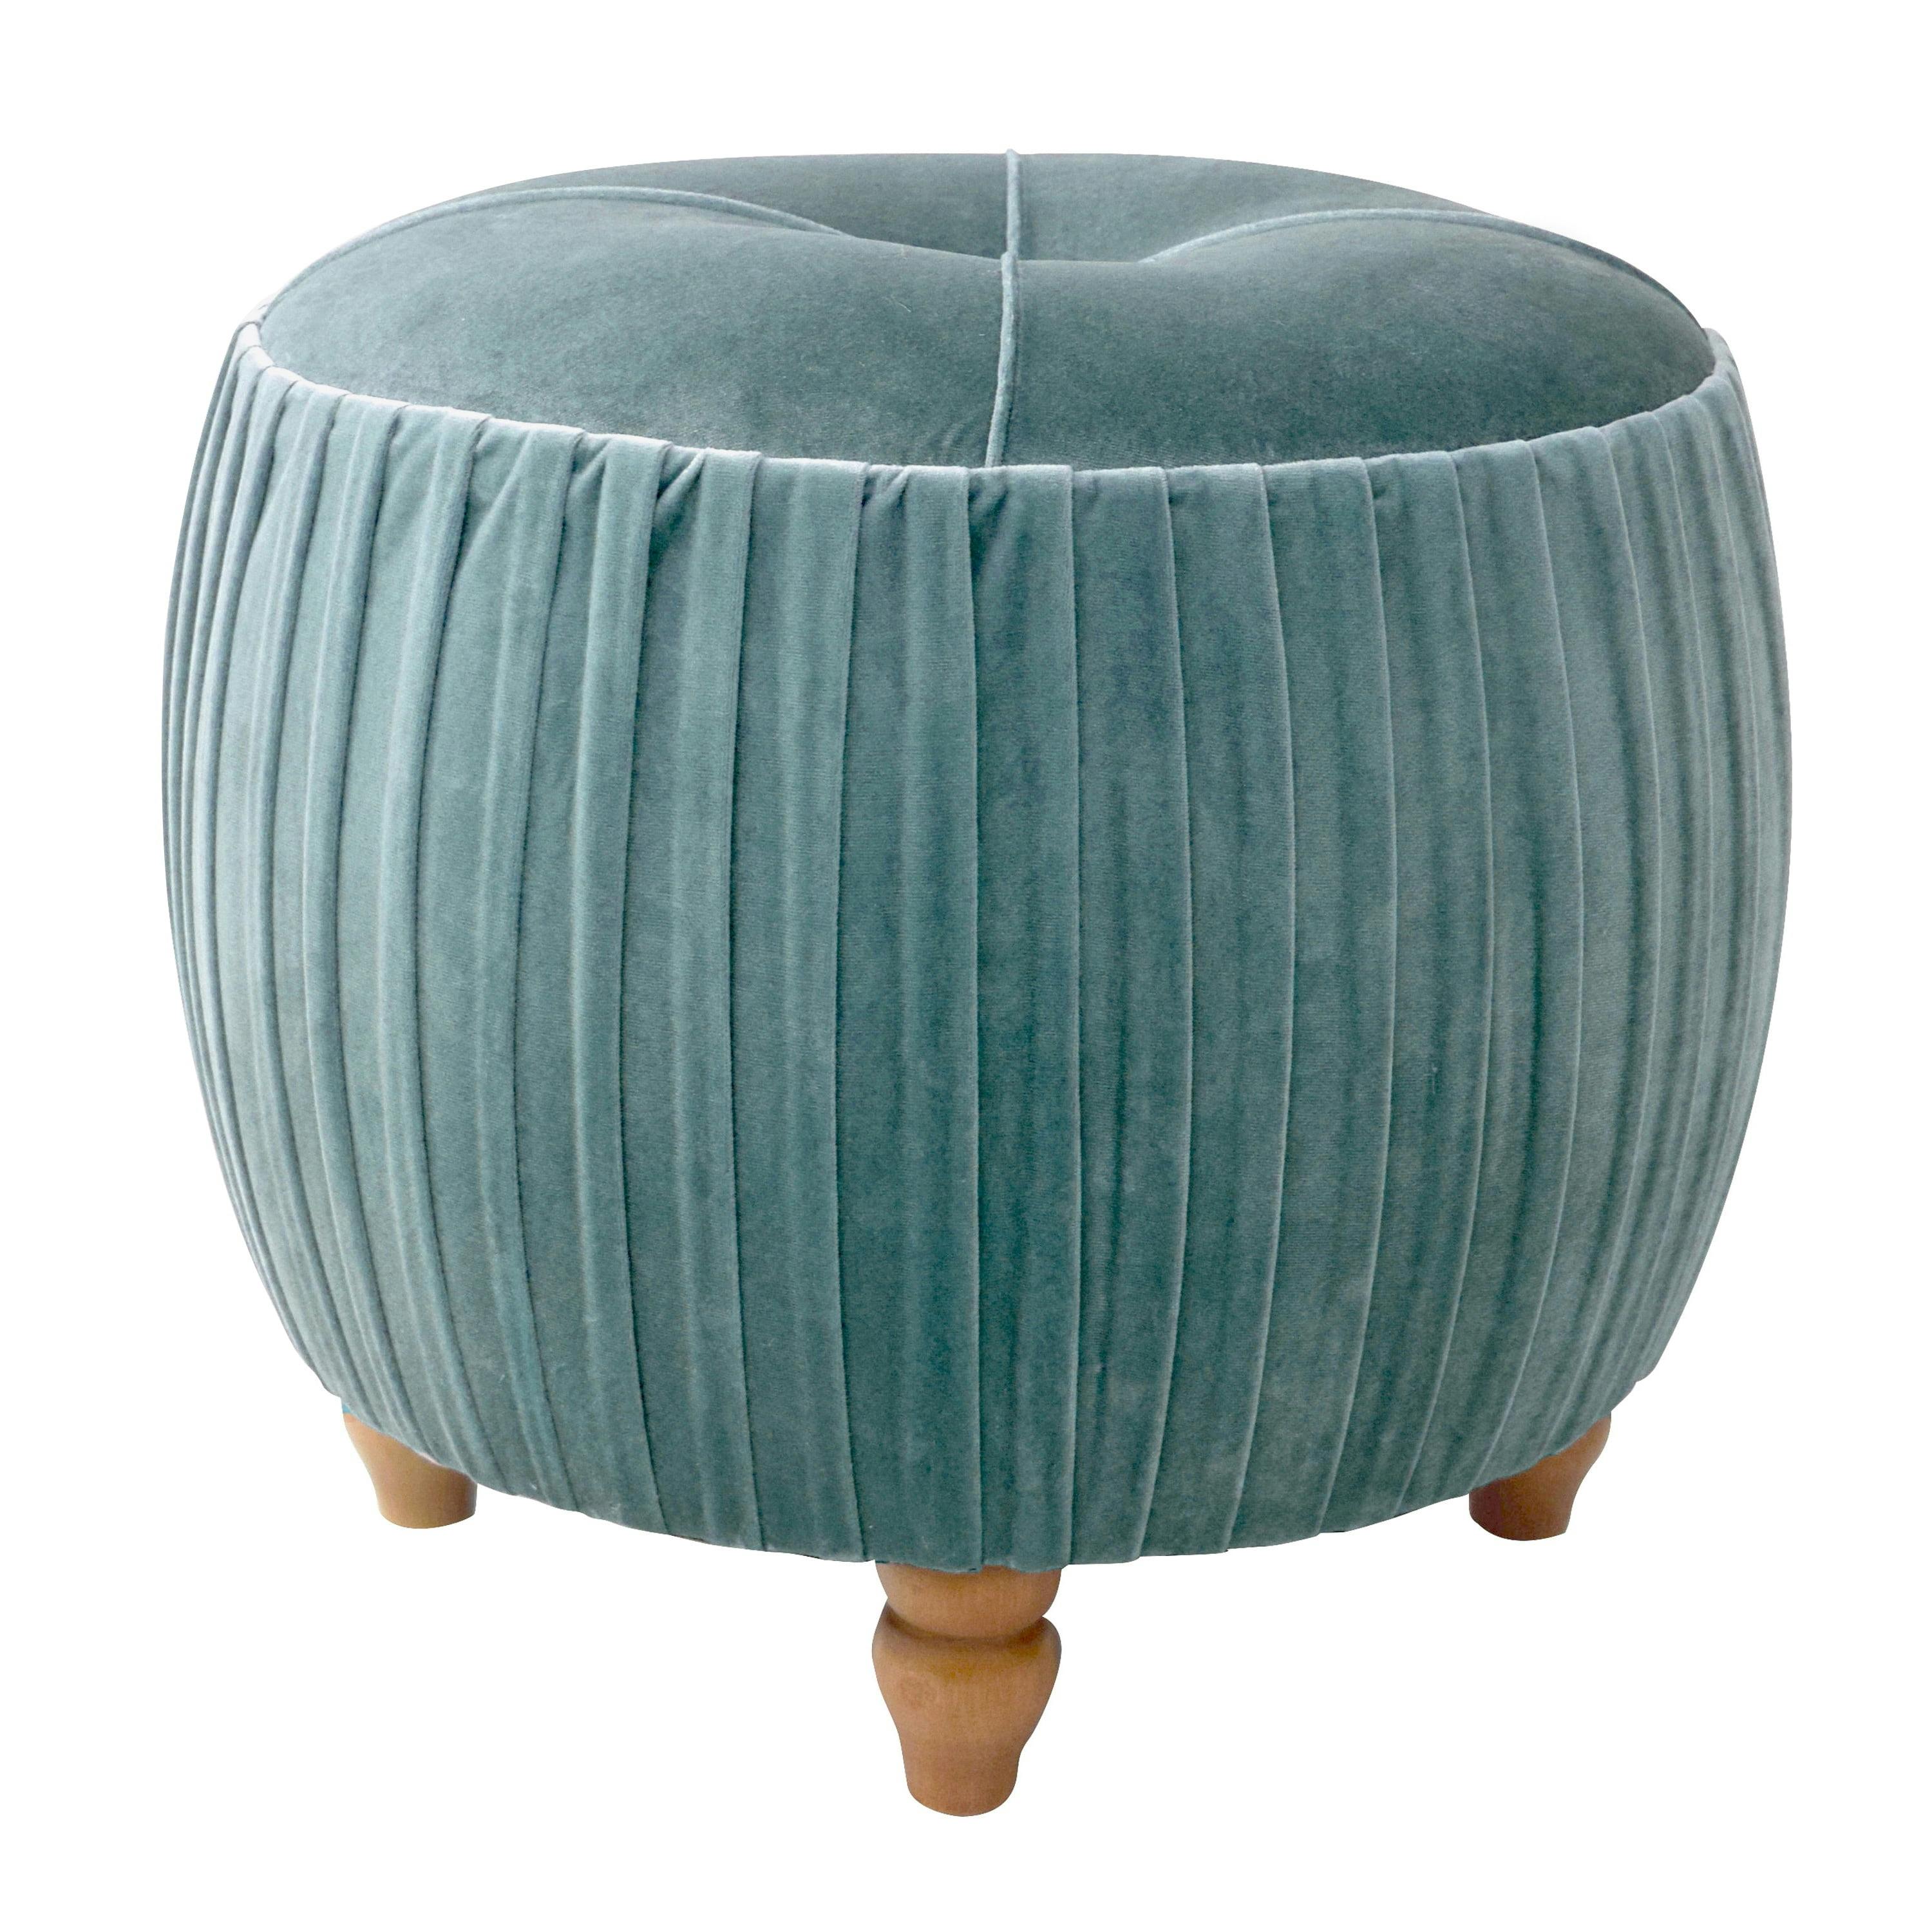 Helena Emerald Green Velvet Tufted Round Ottoman with Natural Wood Legs